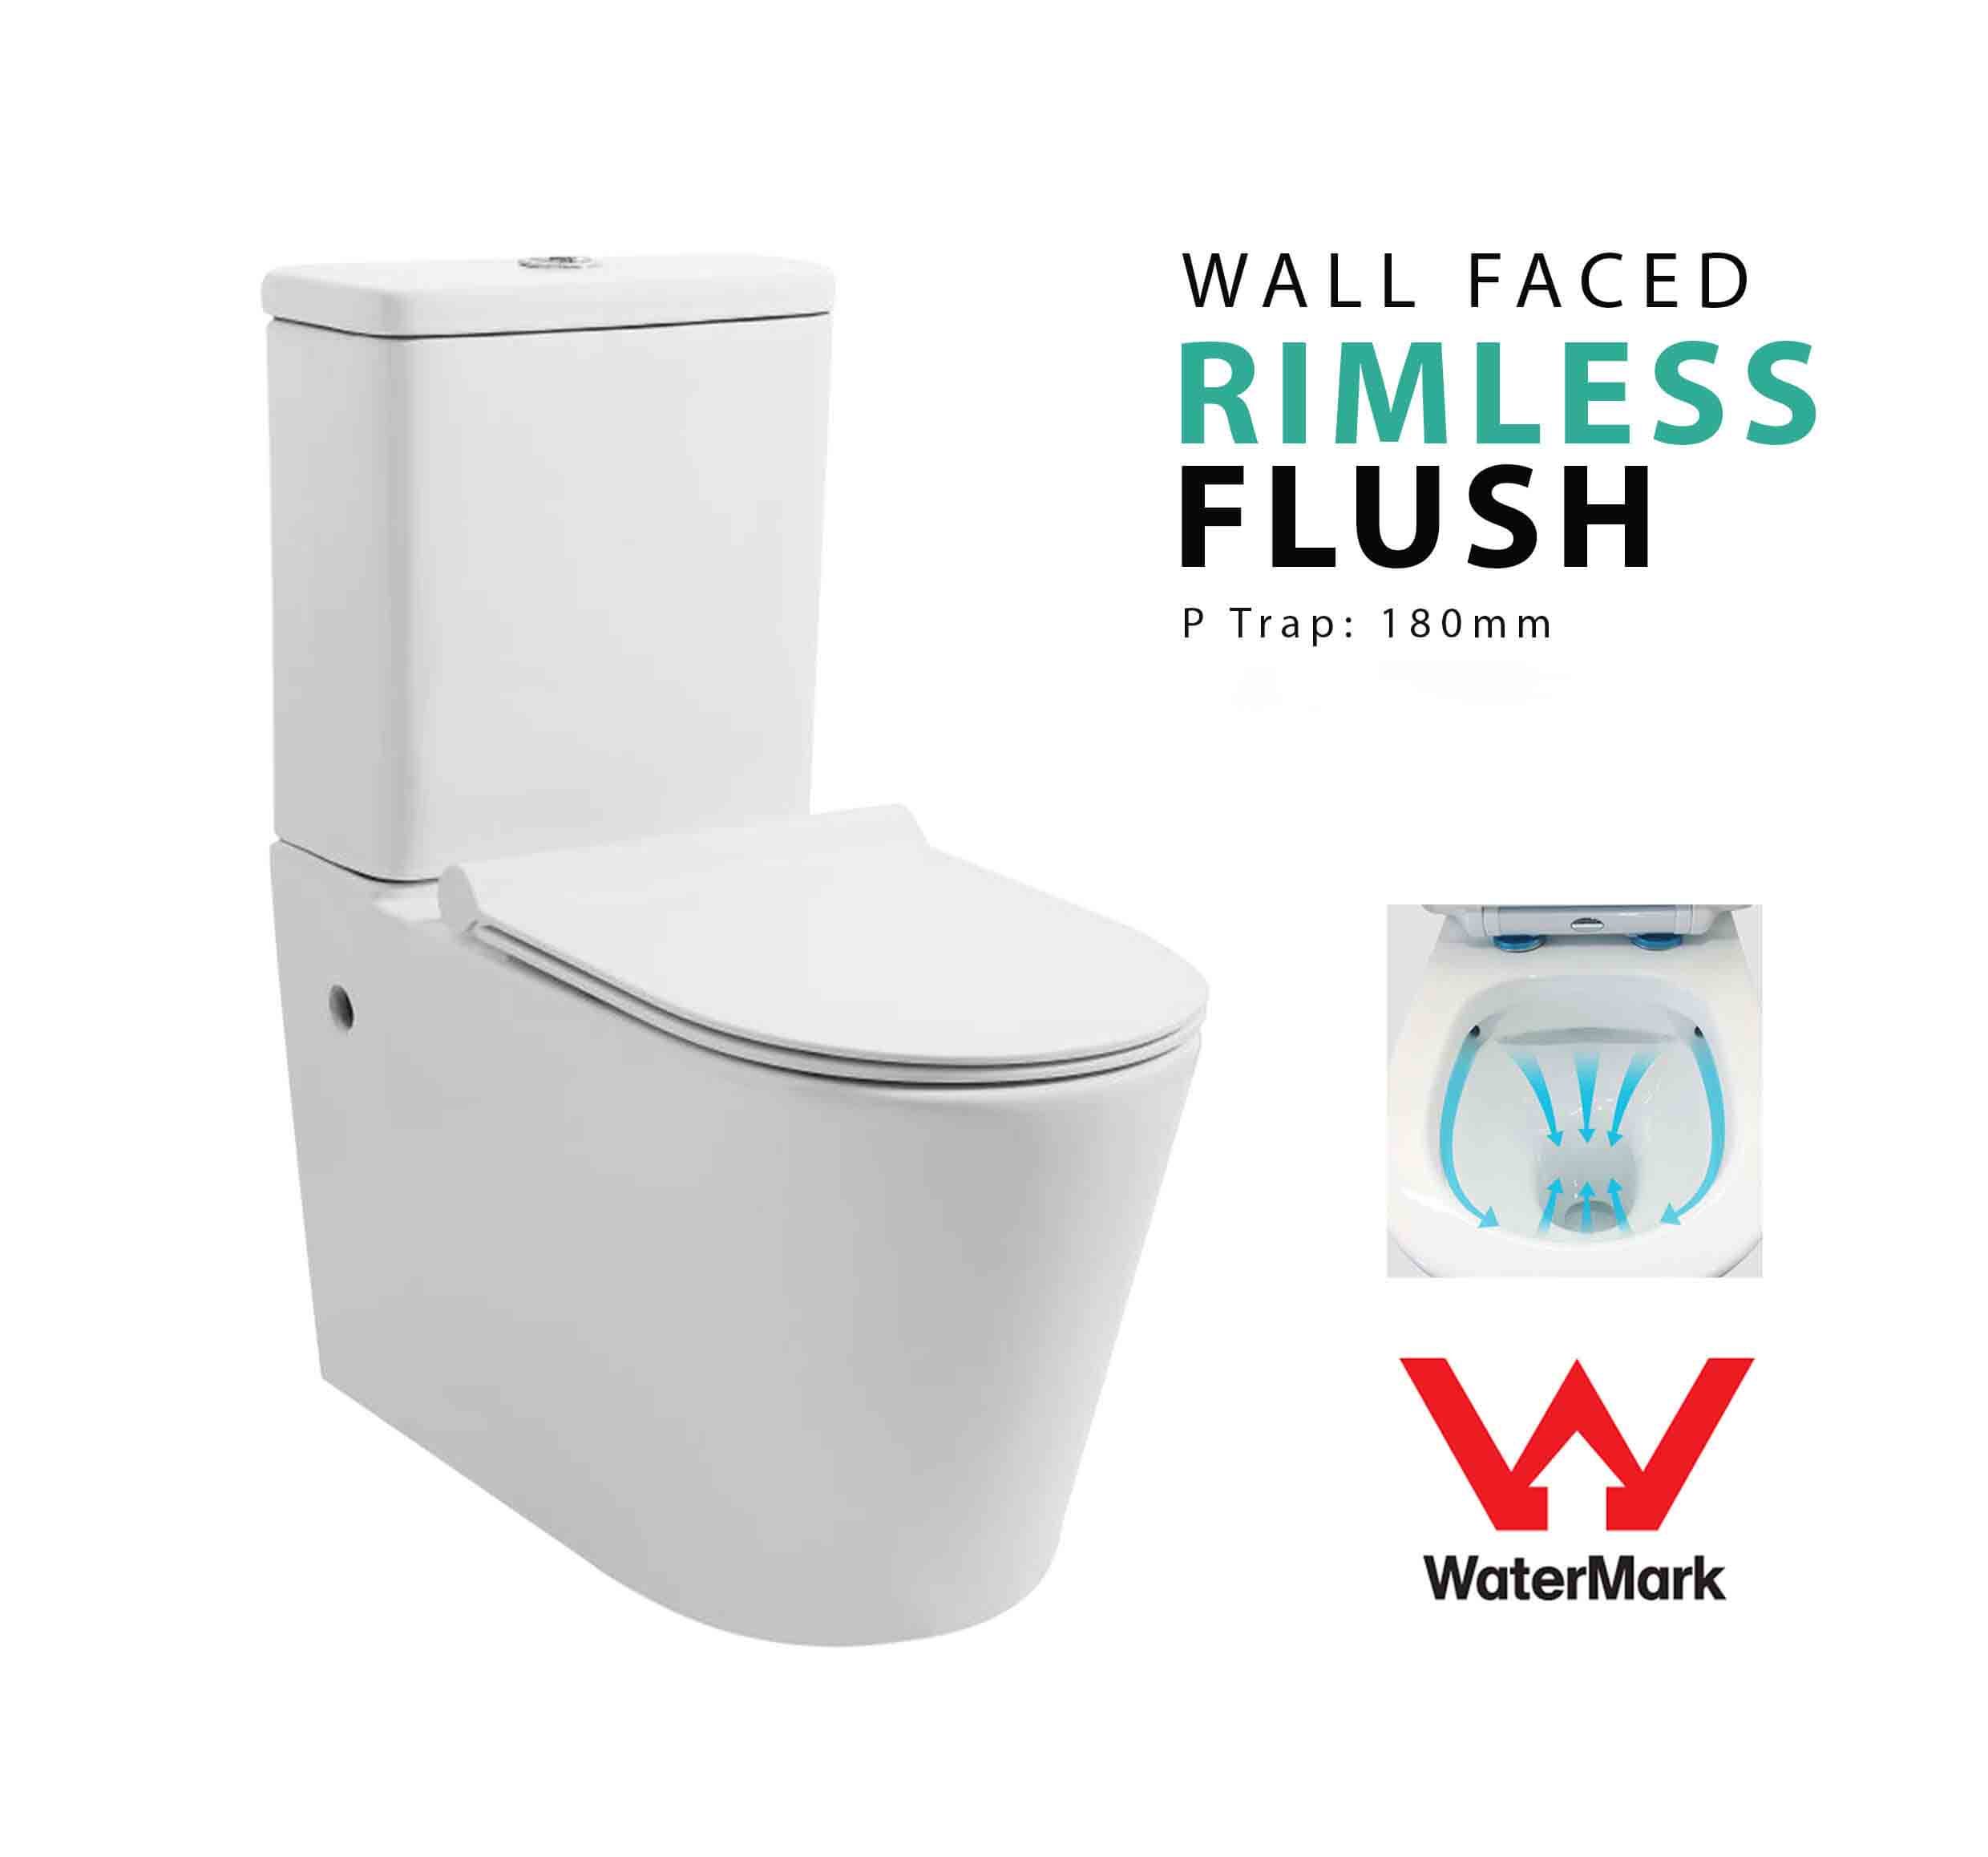 What is a rimless toilet suite？